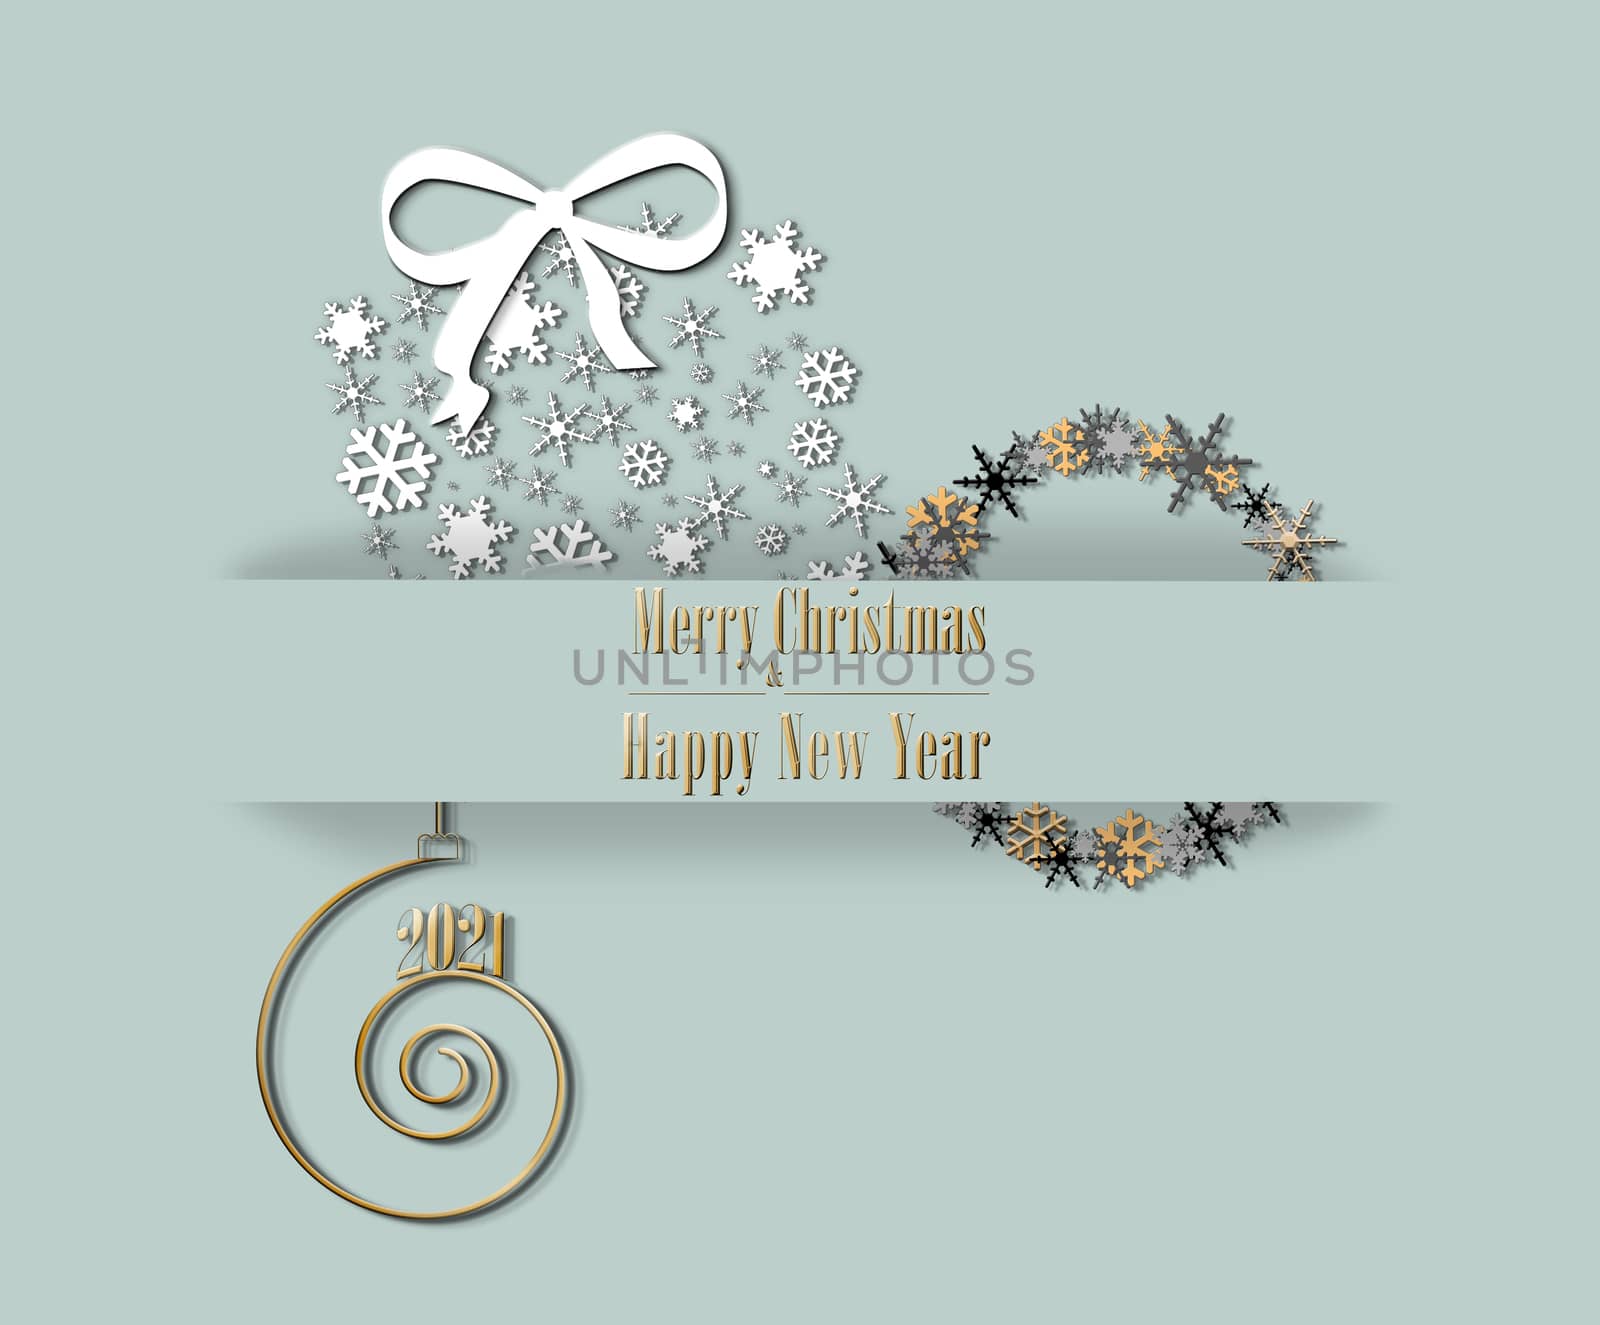 2021 Merry Christmas and Happy New year card in pastel colour by NelliPolk